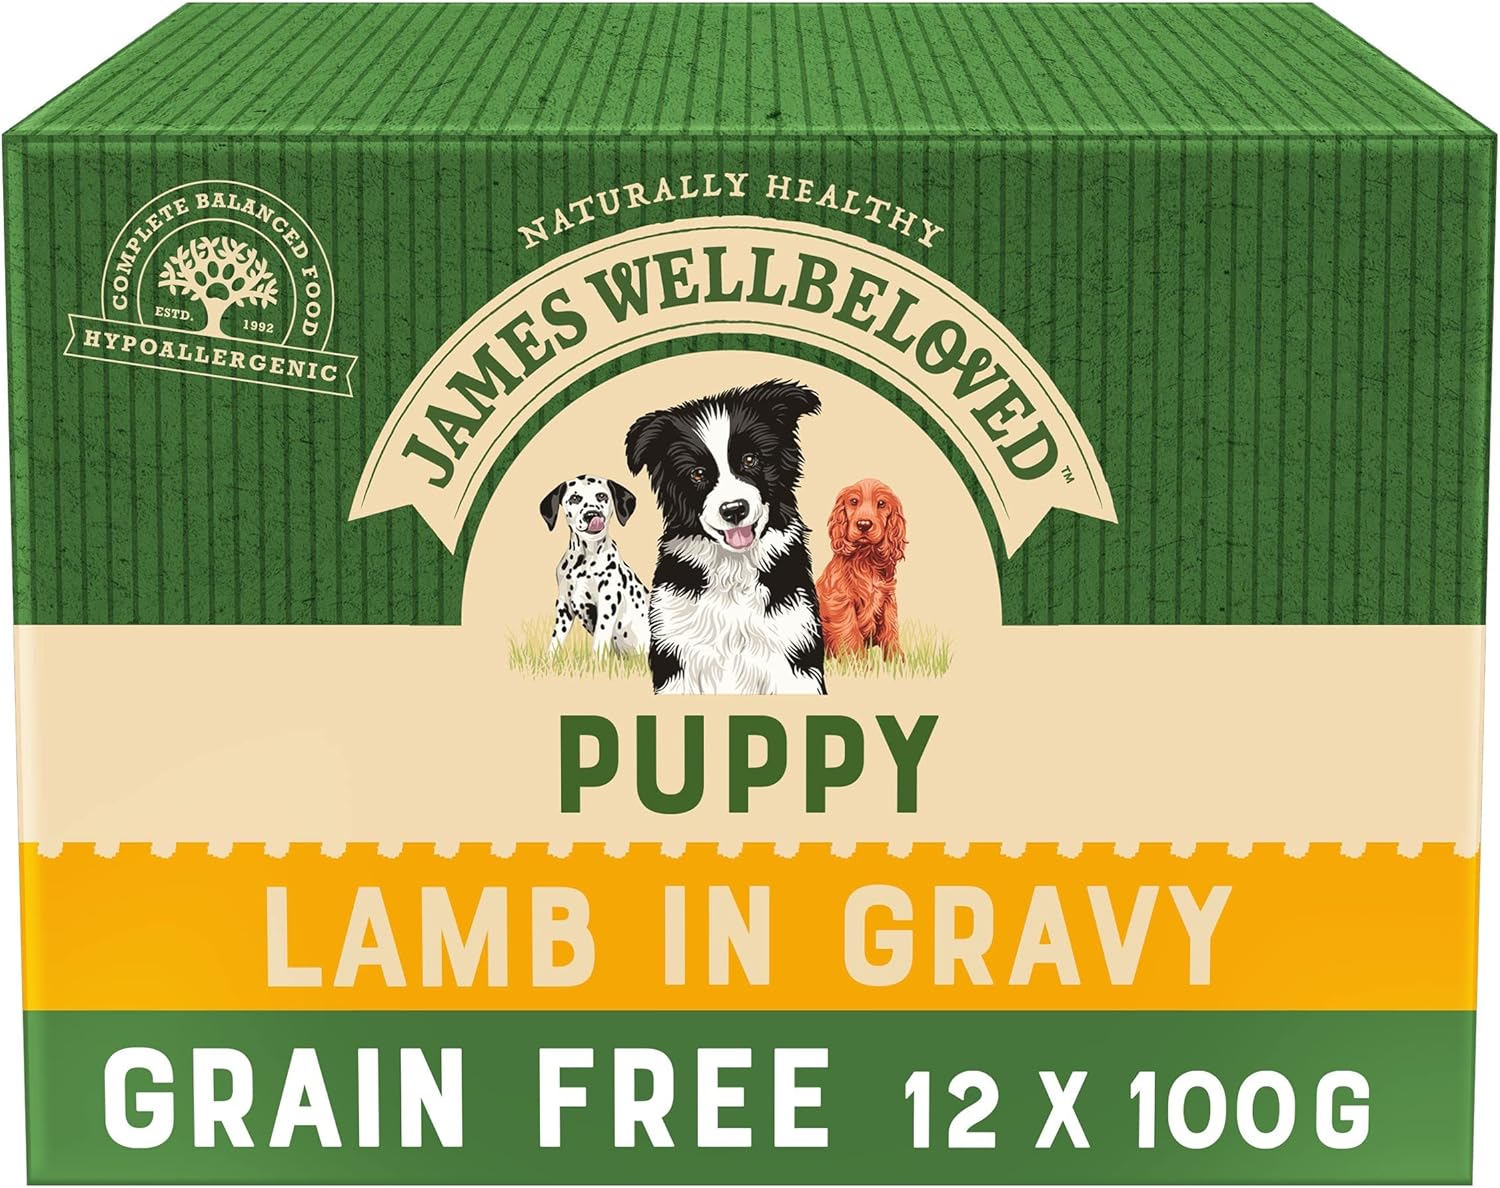 James Wellbeloved Junior Grain-Free Lamb in Gravy 12 Pouches, Hypoallergenic Wet Dog Food for Puppies, Pack of 1 (12x100 g)?9003579006351